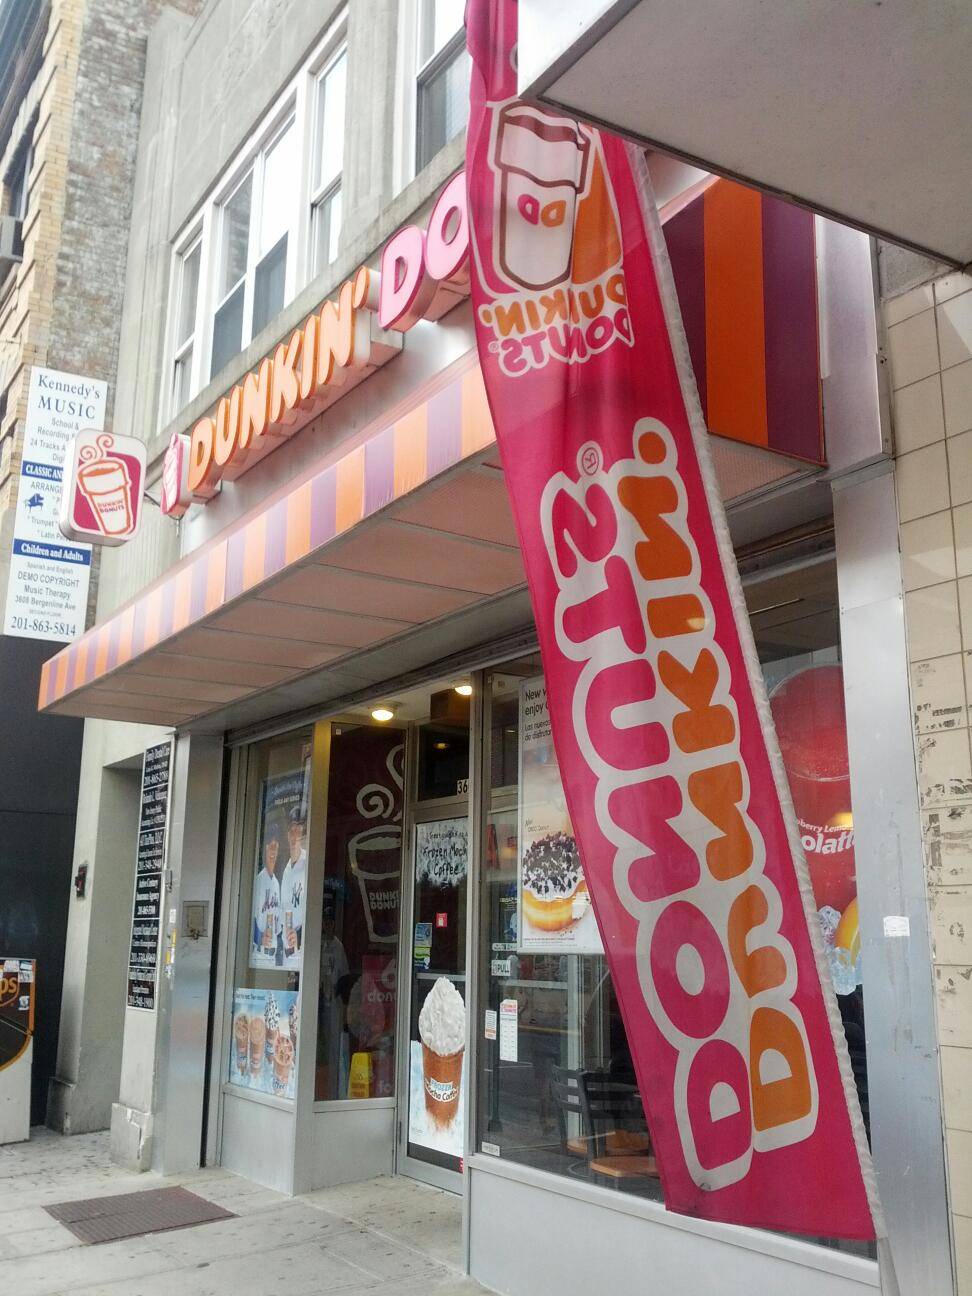 Dunkin Donuts | cafe | 3606 Bergenline Ave, Union City, NJ 07087, USA | 2018667646 OR +1 201-866-7646